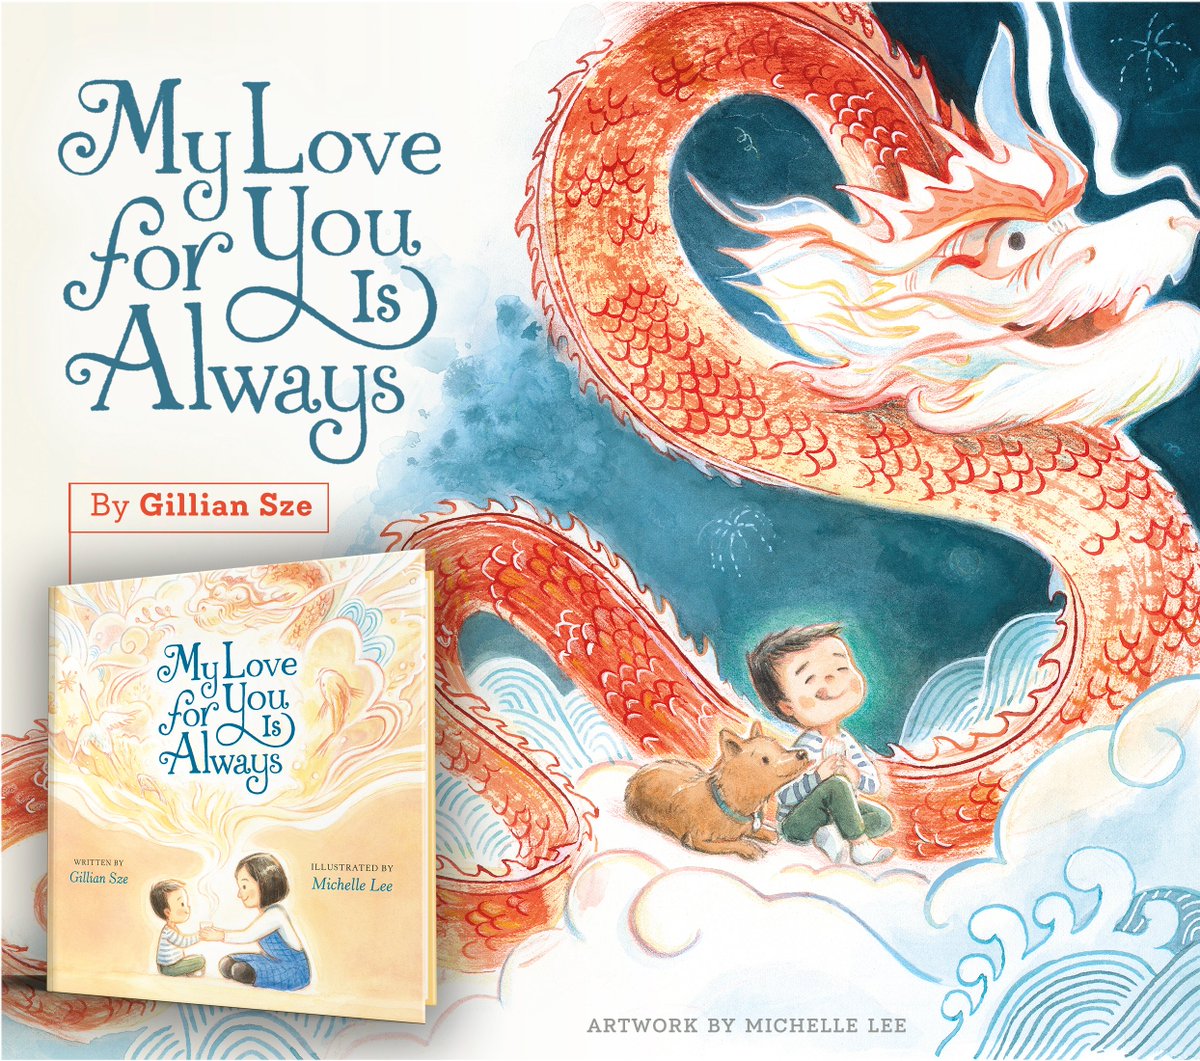 We'll also be reading aloud the ones our littler readers can't get enough of, like YOU ARE MY FAVORITE COLOR by @gilliansze and illustrated by @msbeautifique, and MY LOVE FOR YOU IS ALWAYS, also by @gilliansze and illustrated by Michelle Lee. #RepresentAsianStories